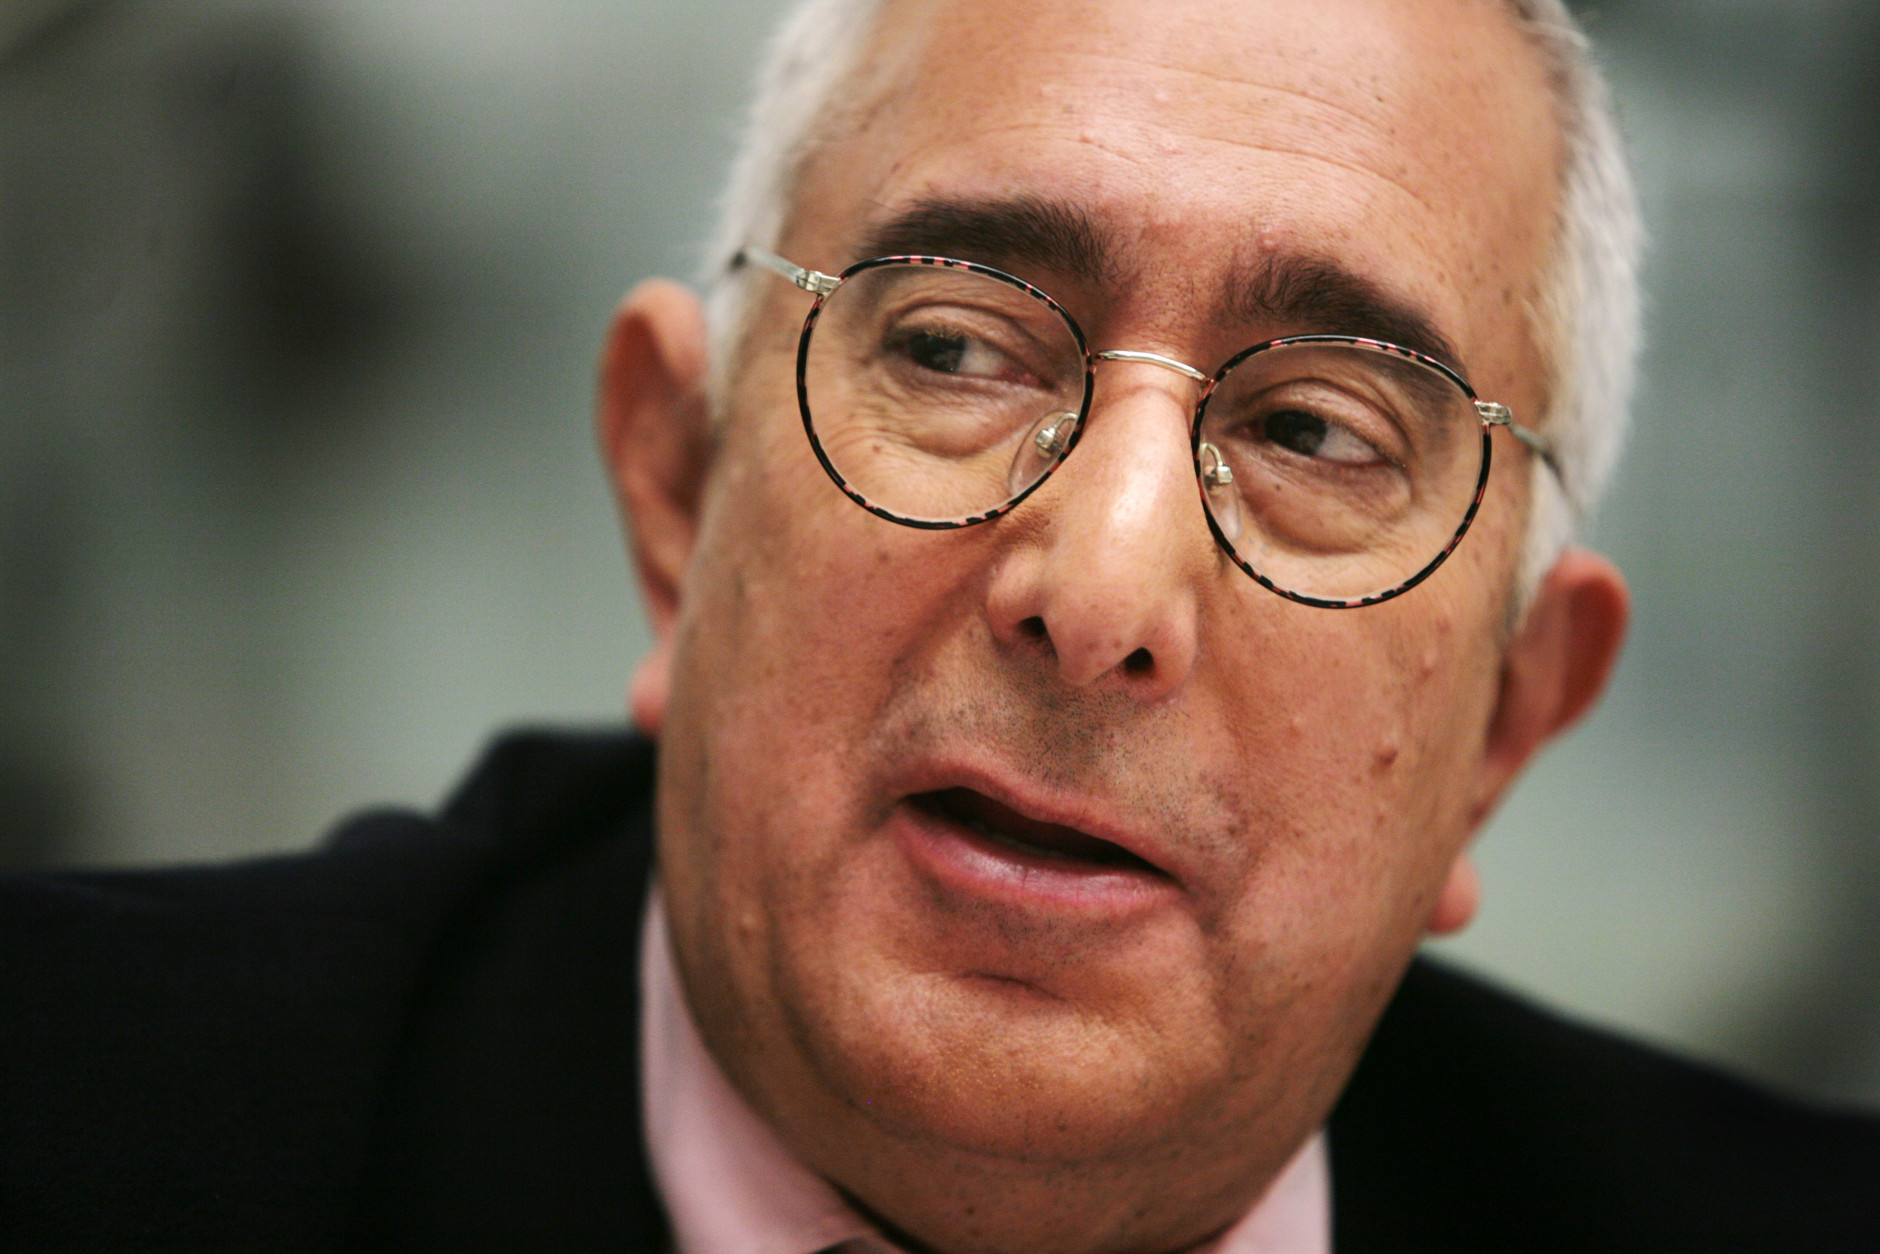 FILE  -In this Nov. 12, 2007 file photo, Ben Stein is interviewed in New York. Monotone TV personality Ben Stein has been stripped of his Sunday New York Times business column because of his work as a pitchman for a credit monitoring company.  (AP Photo/Bebeto Matthews, file)